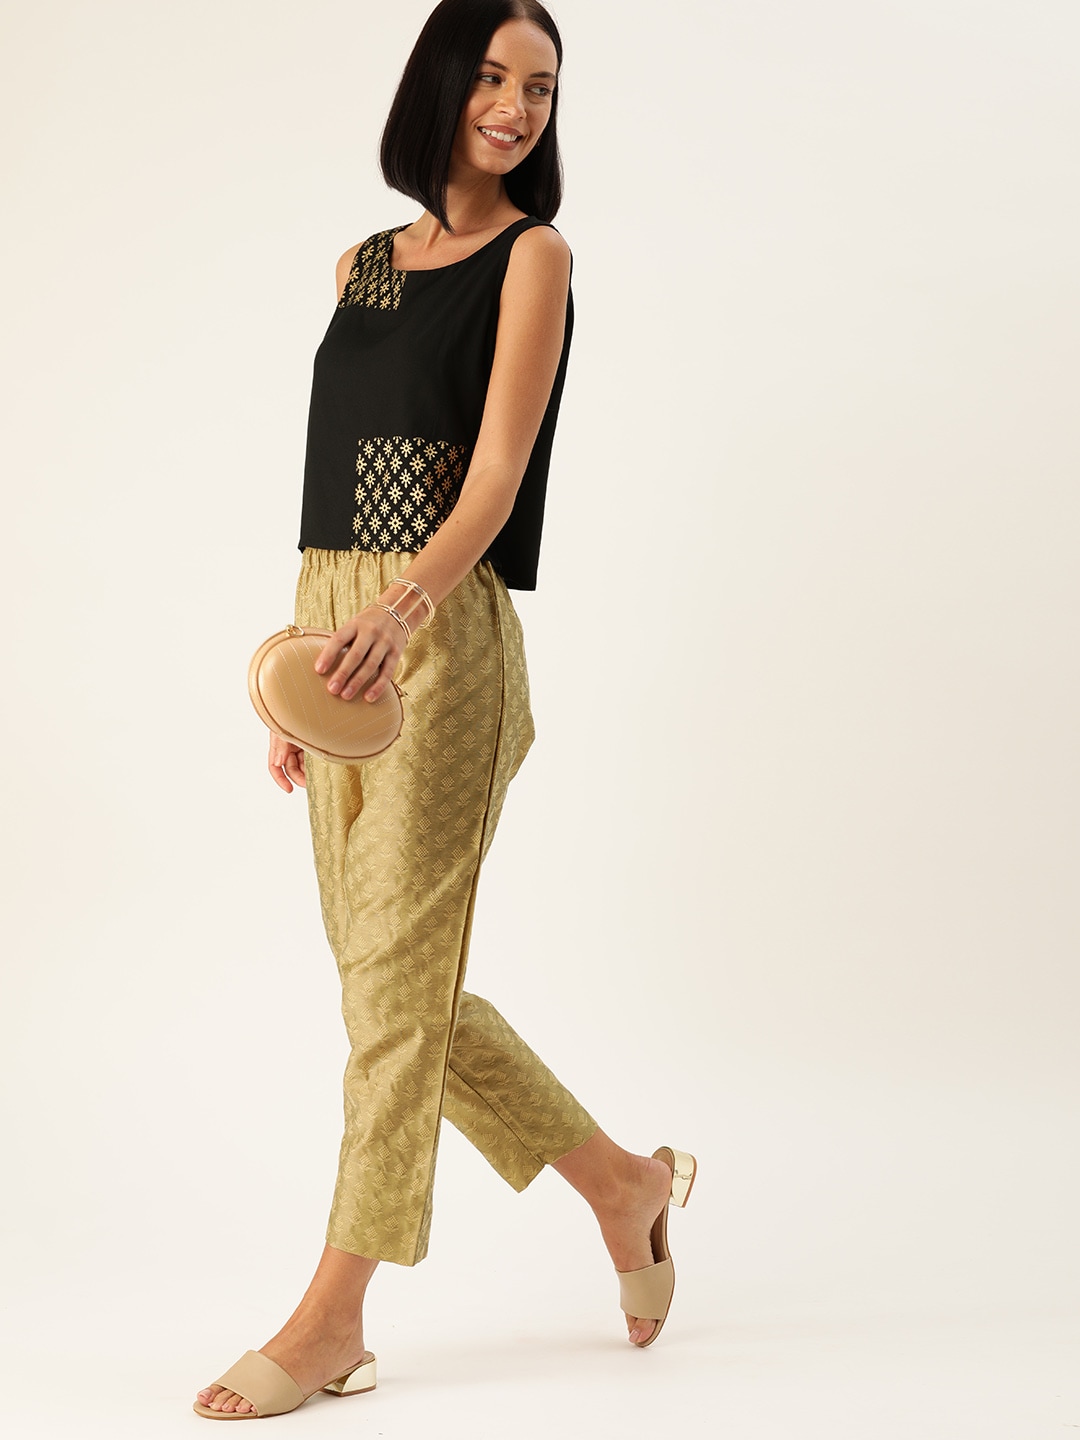 Varanga Women Black & Gold-Toned Printed Top with Trousers Price in India